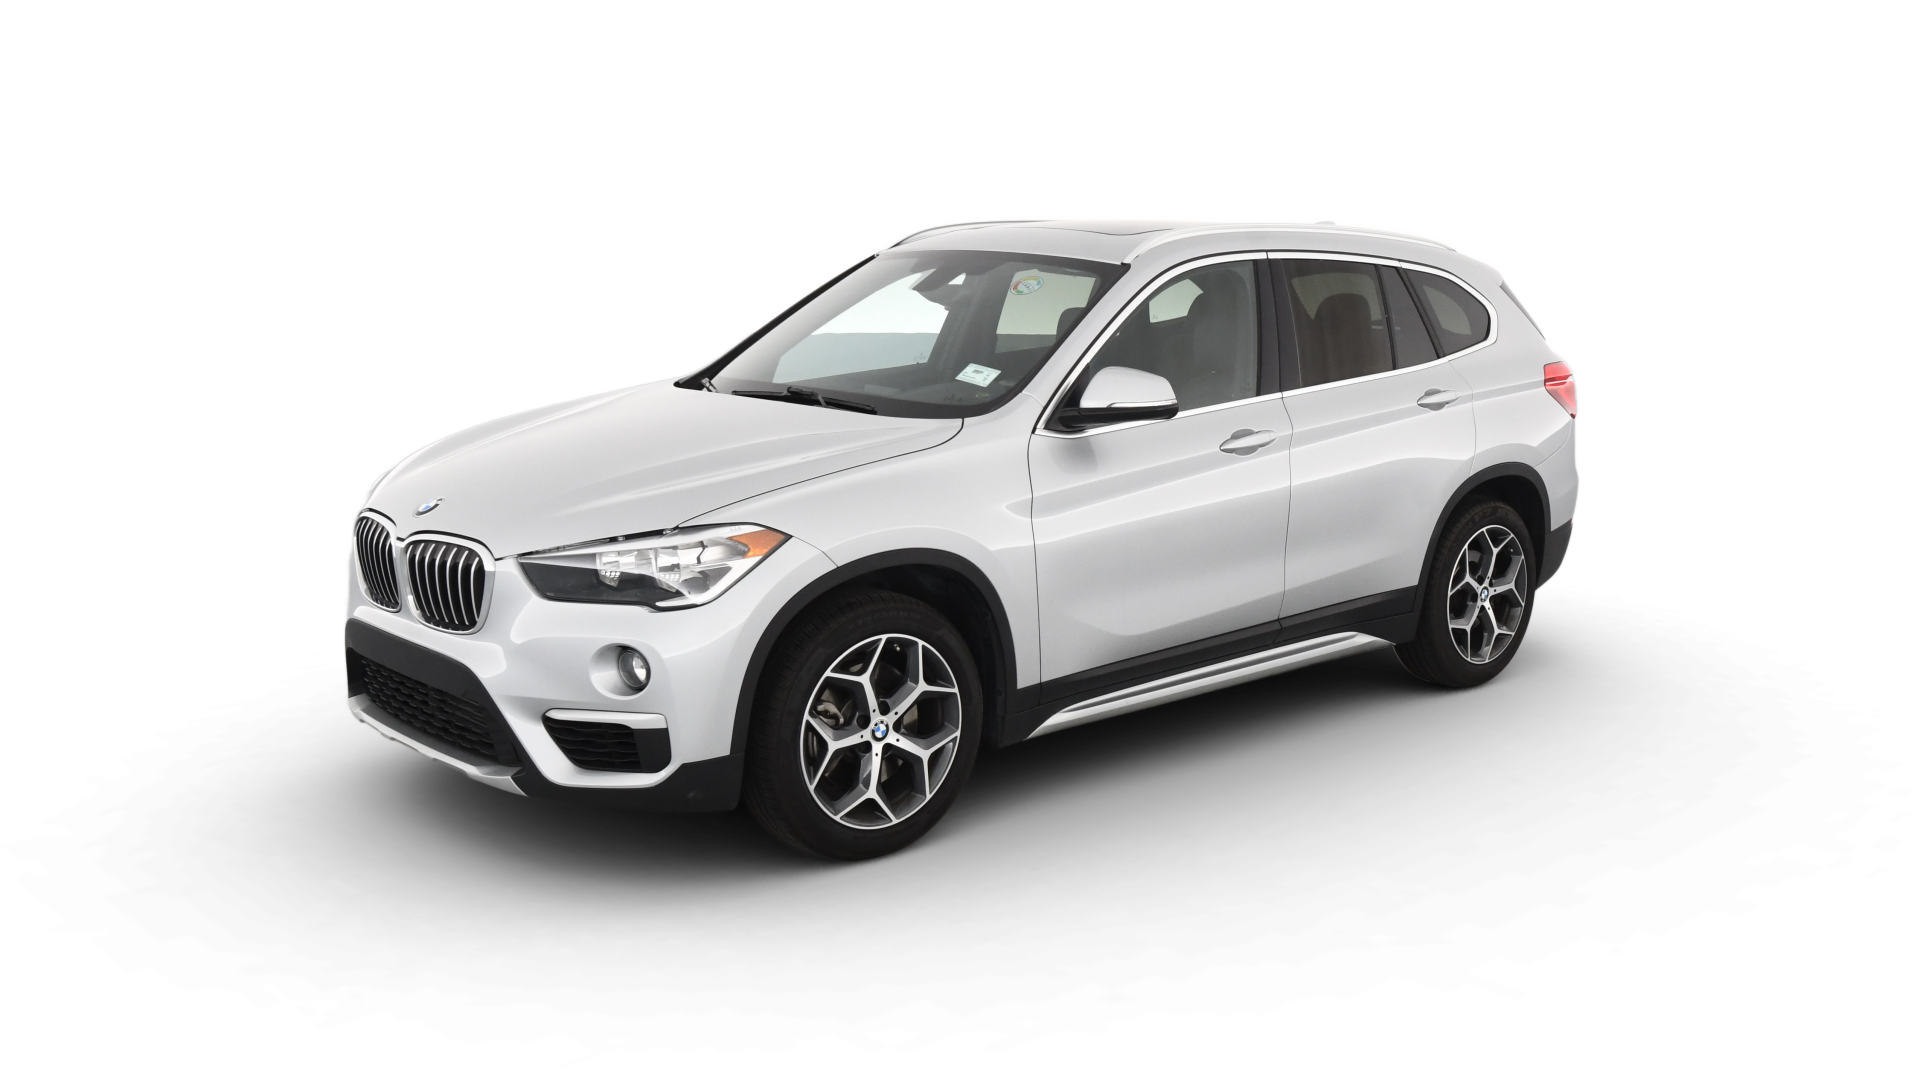 Used BMW X1 for Sale Online